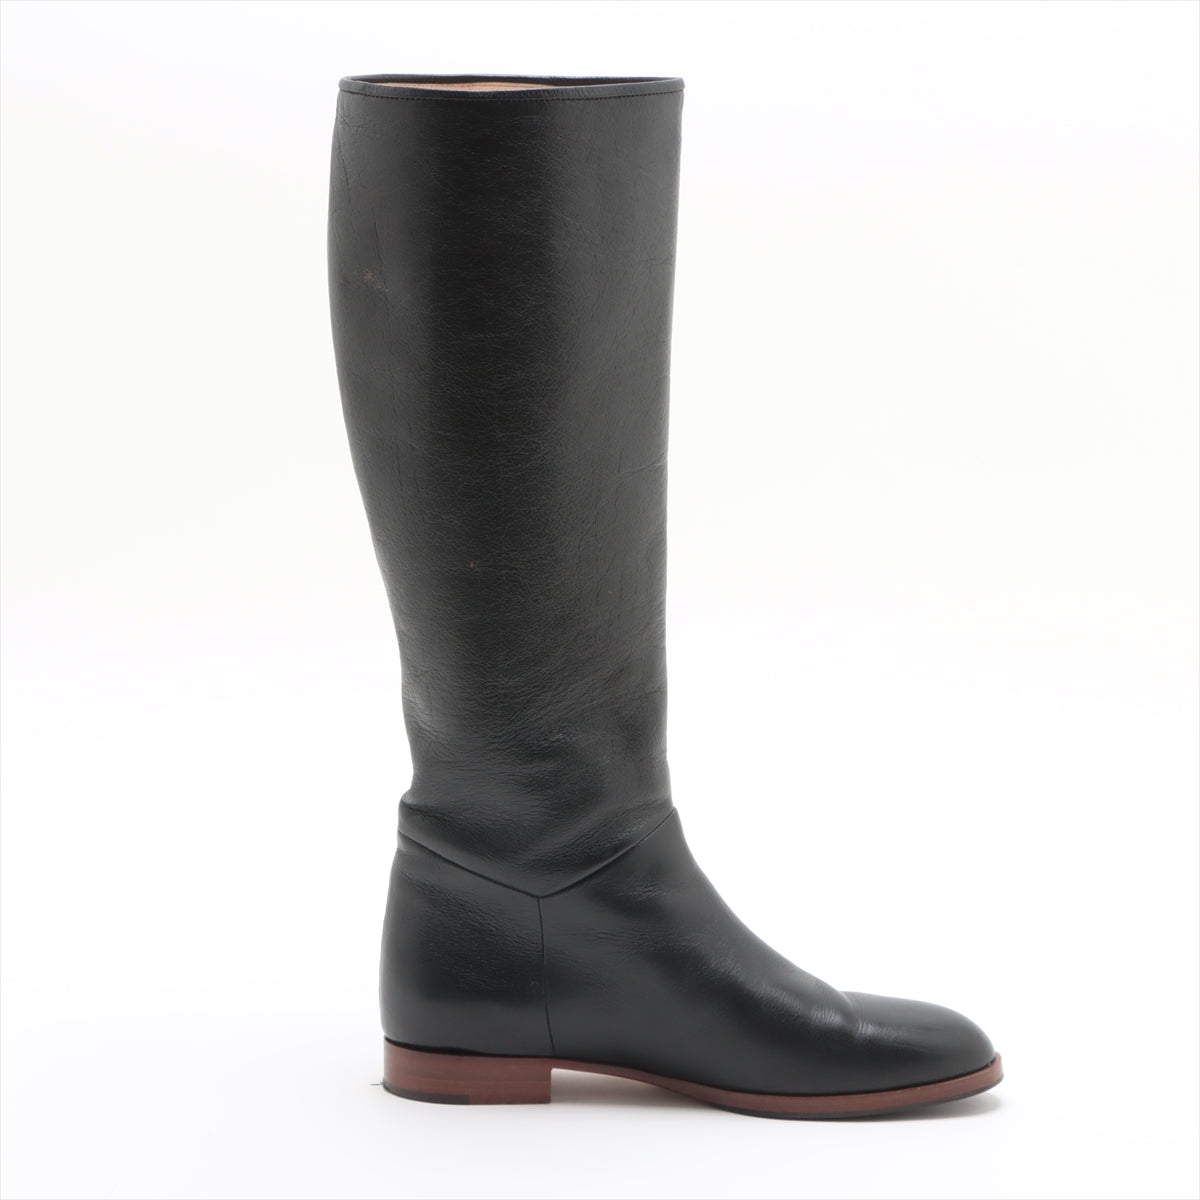 Gucci Leather Long boots 36 Ladies' Black 549678 Sherry Line GG Marmont